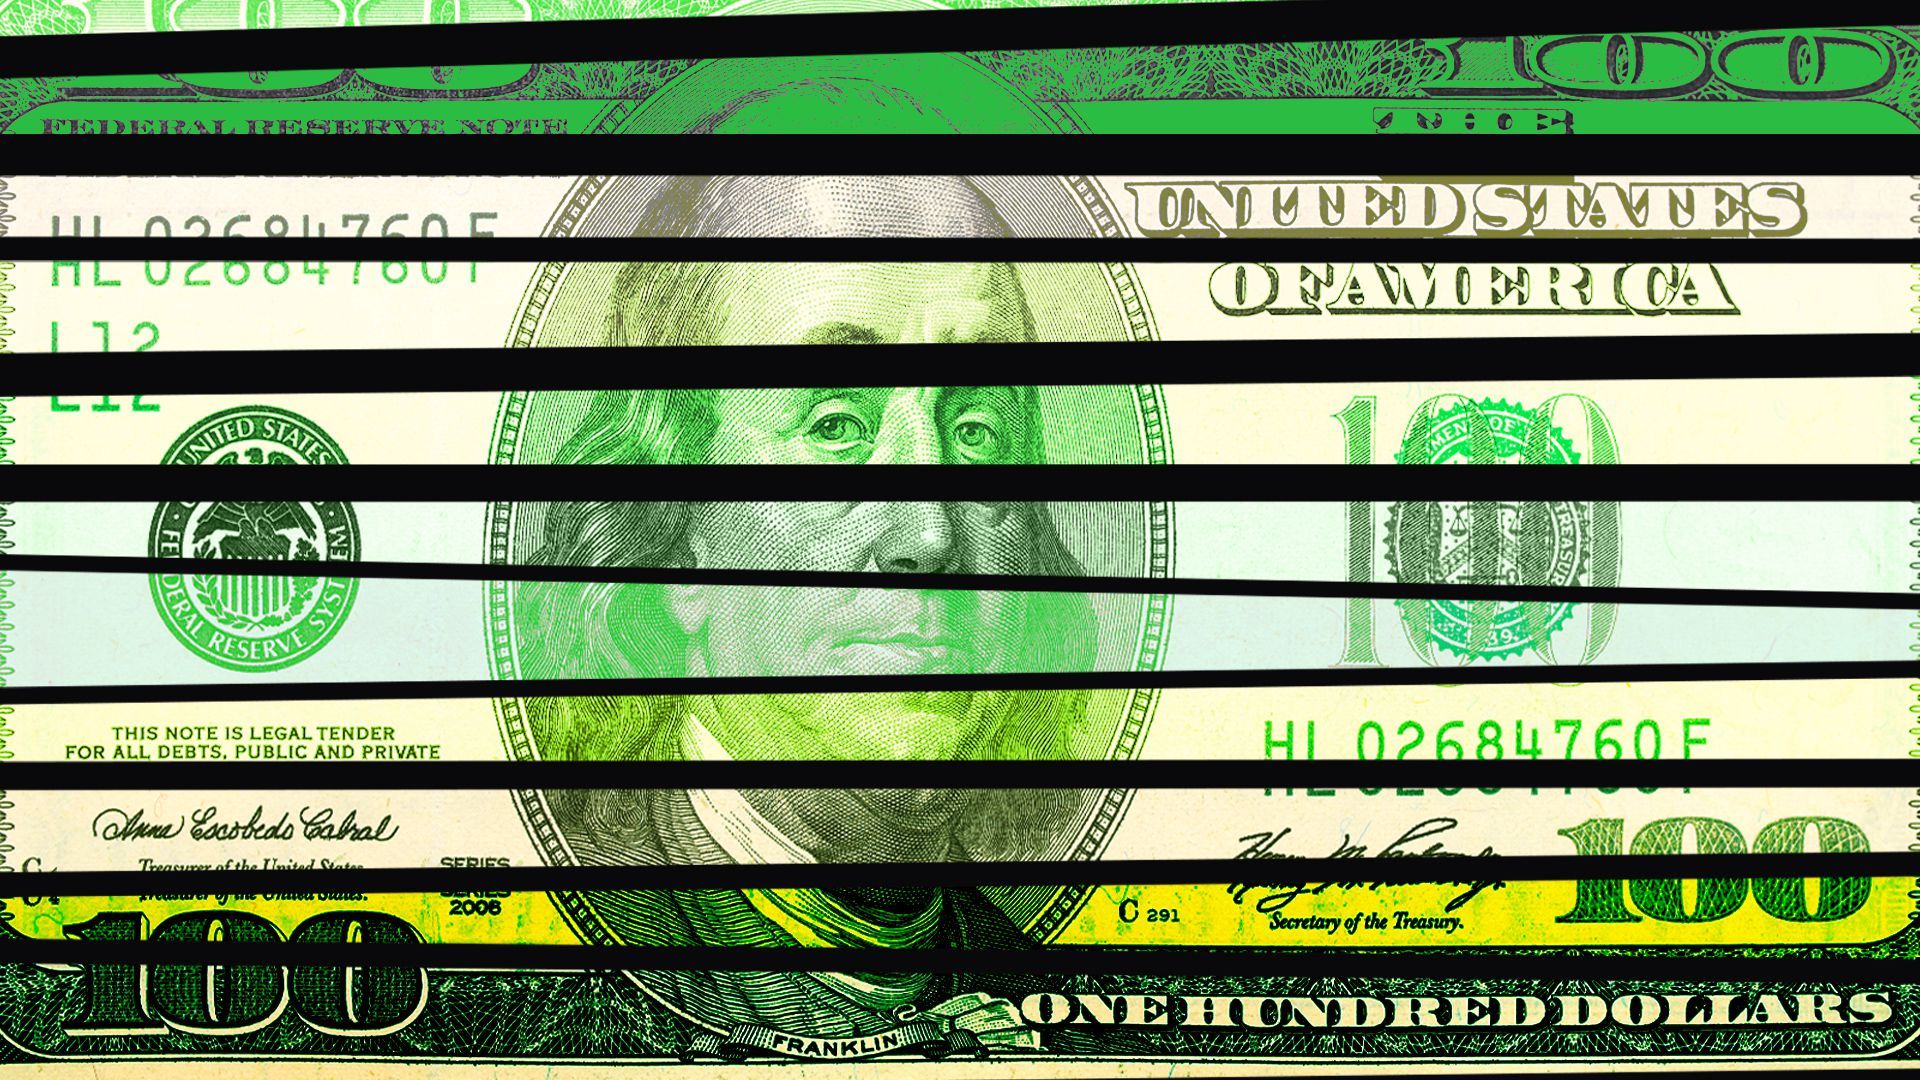 Illustration of a hundred dollar bill cut up and colored different shades of green. 